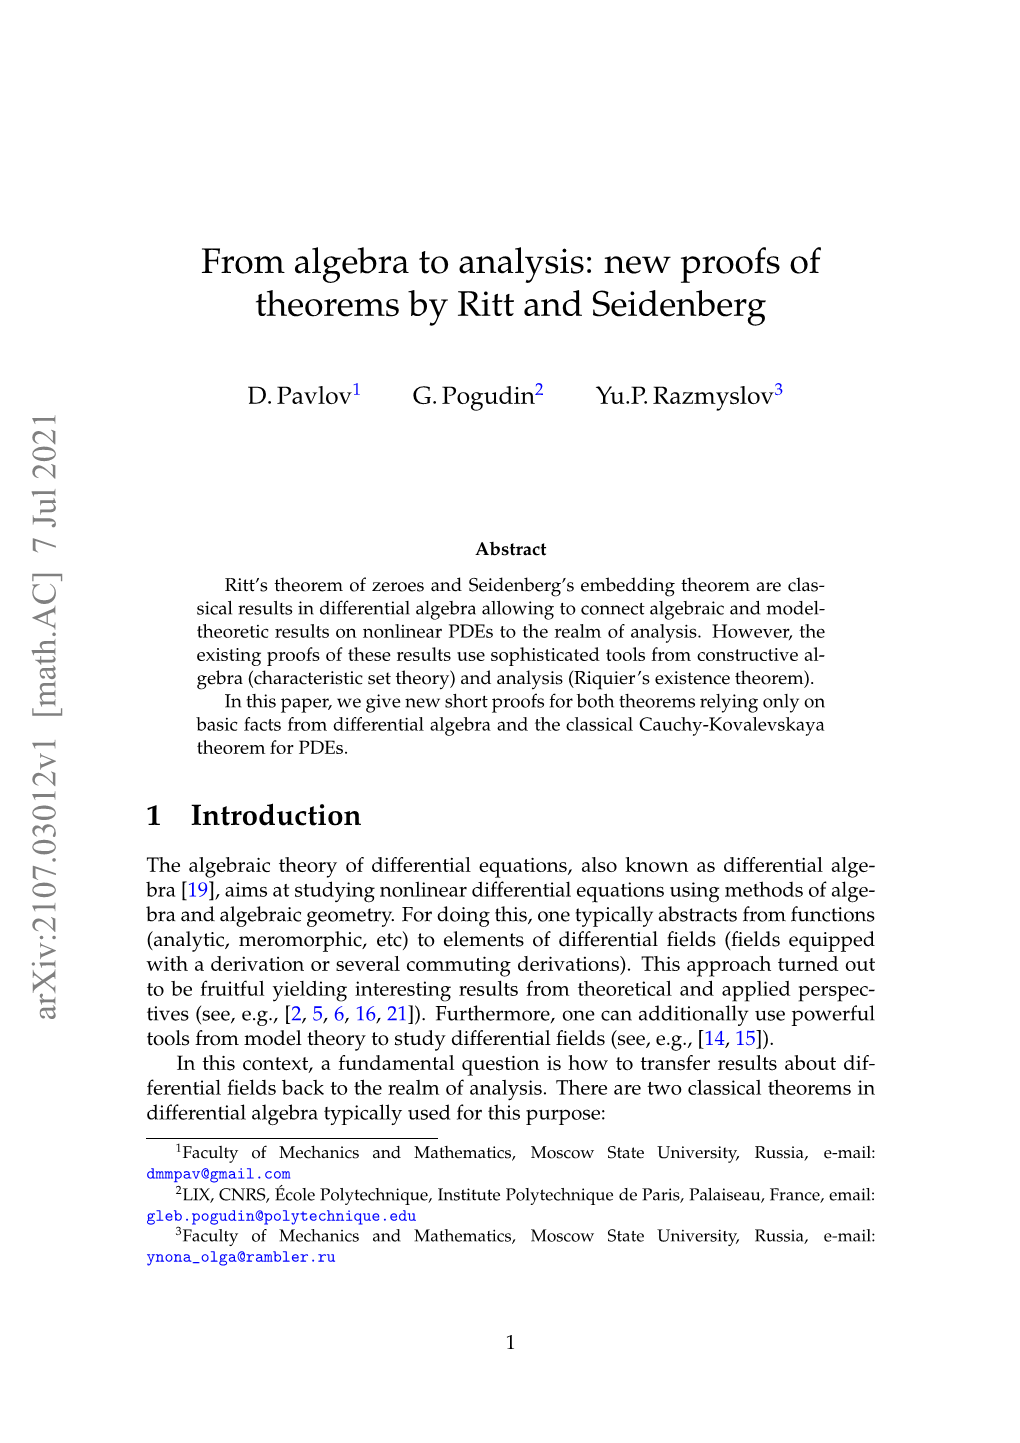 From Algebra to Analysis: New Proofs of Theorems by Ritt and Seidenberg